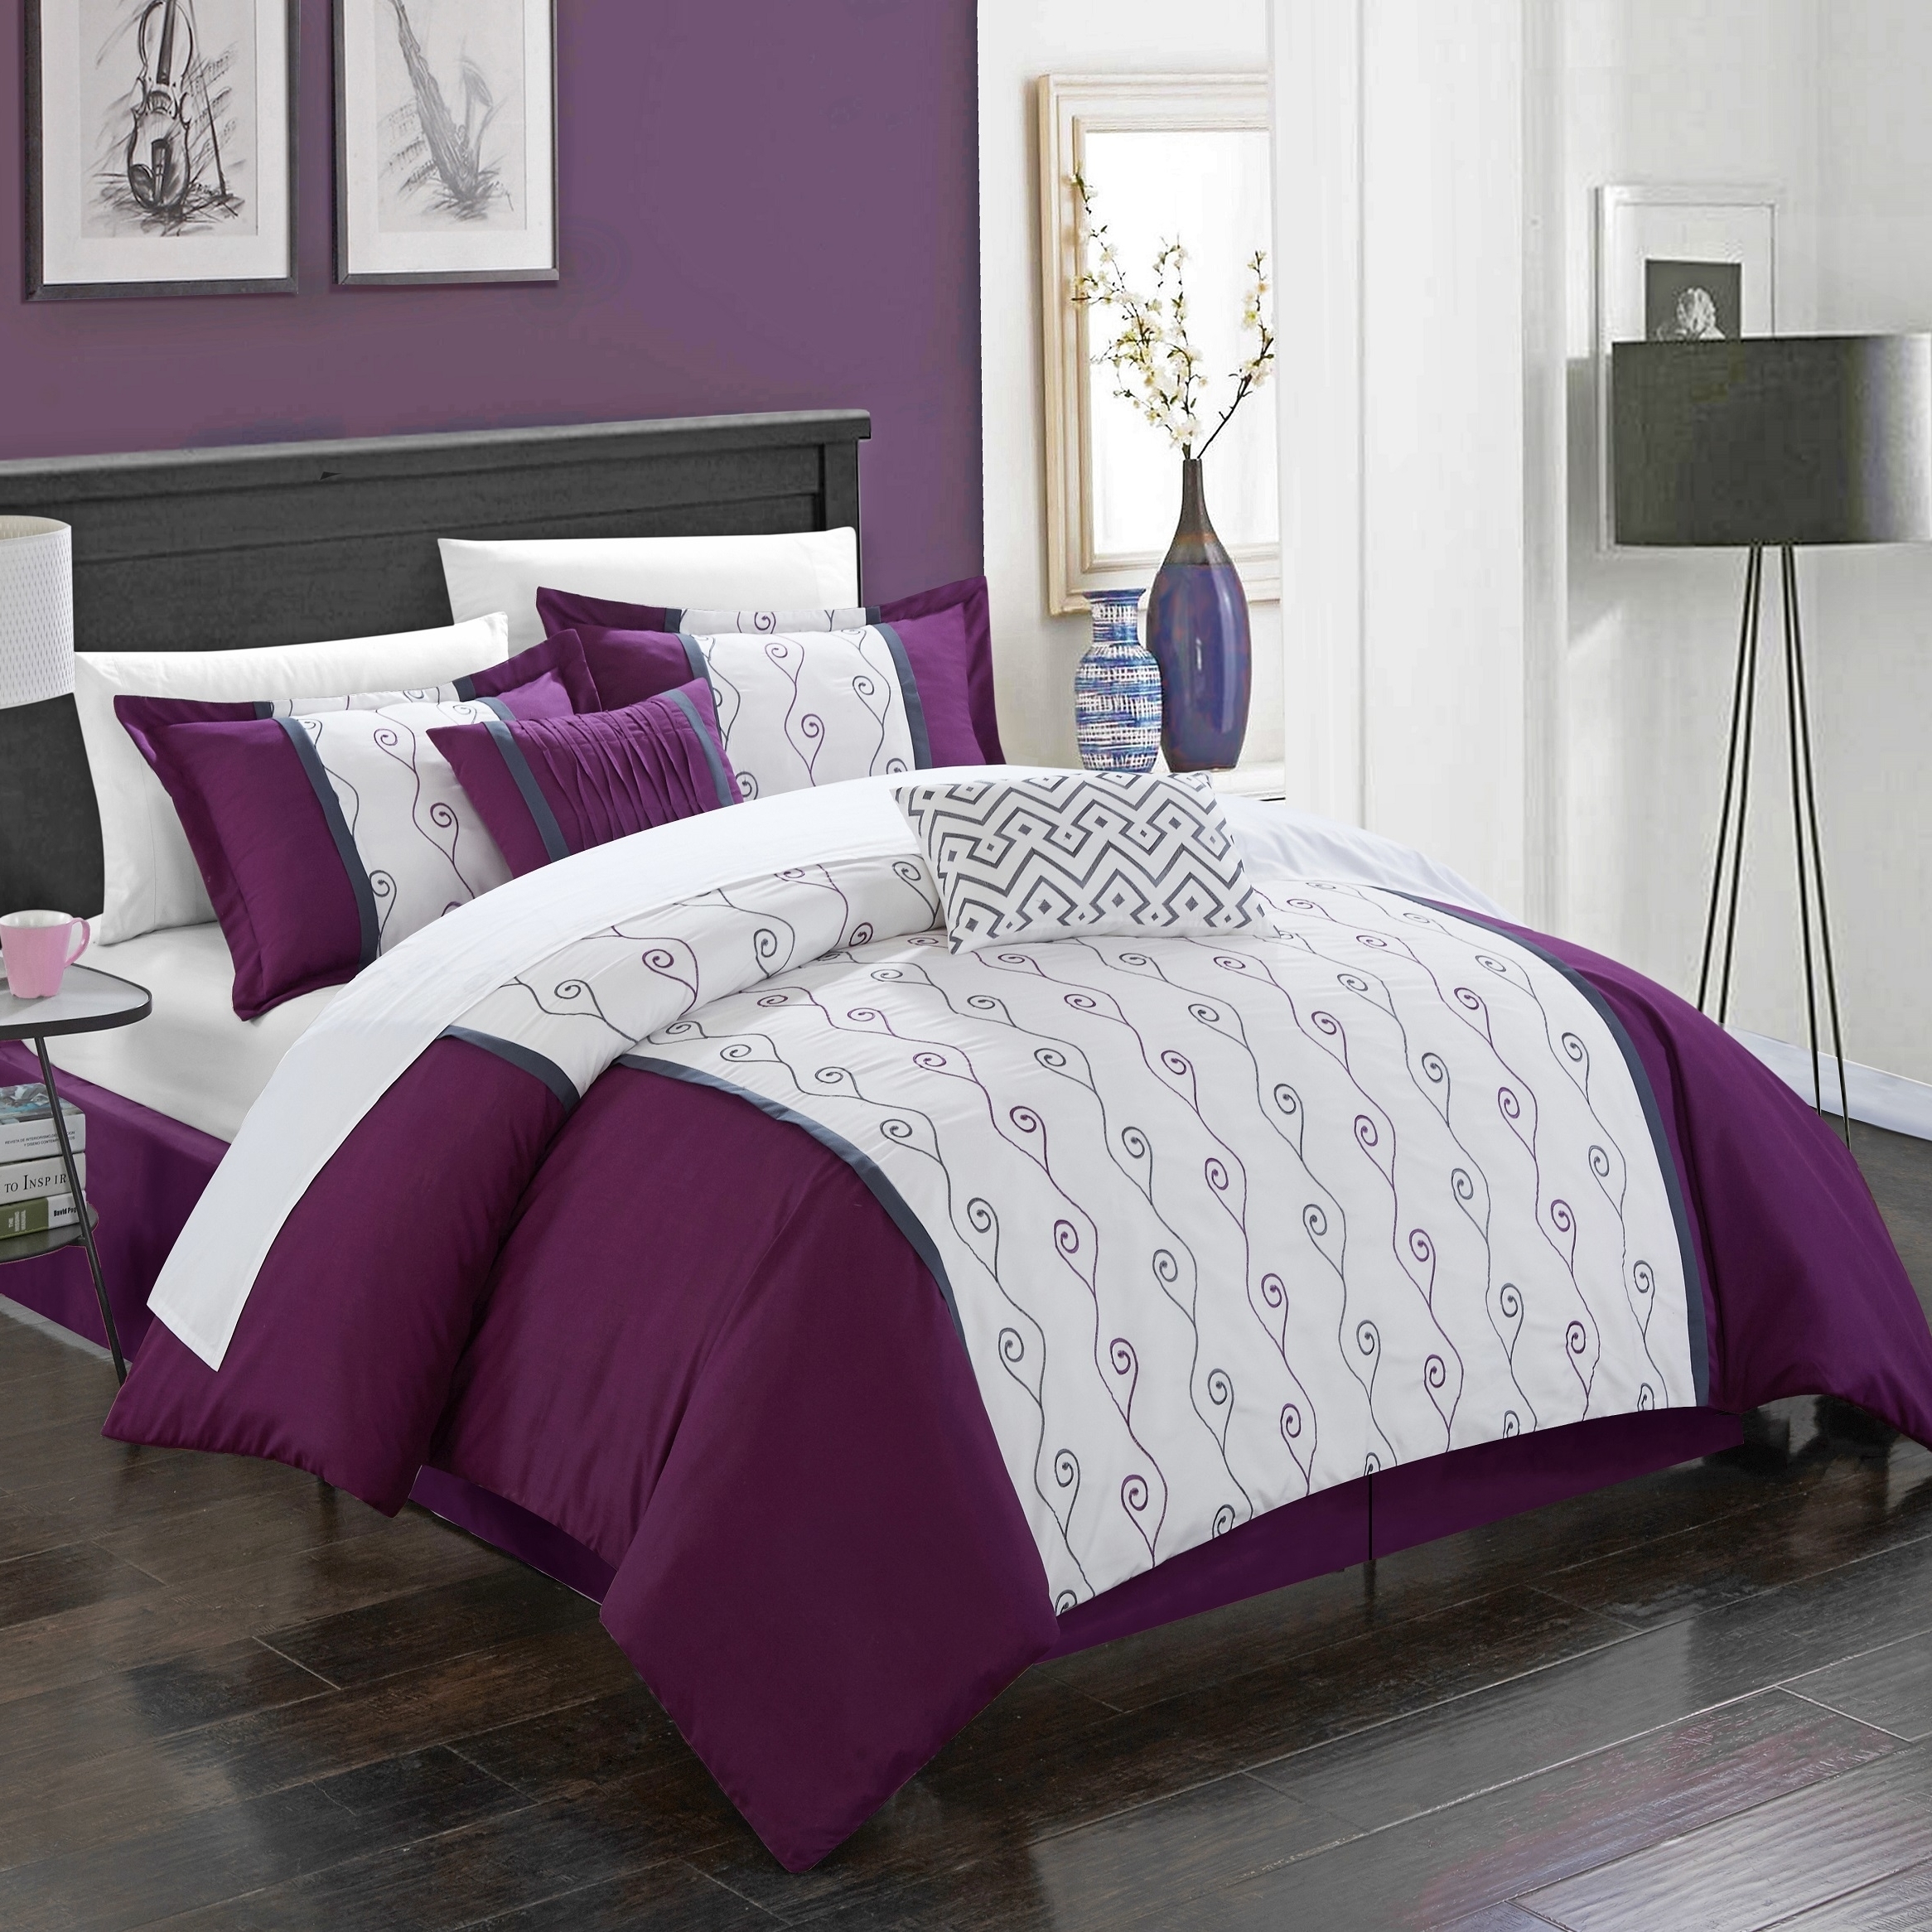 Lystra 6 Piece Comforter Set Color Block Embroidered Bed In A Bag Bedding - Plum, Queen